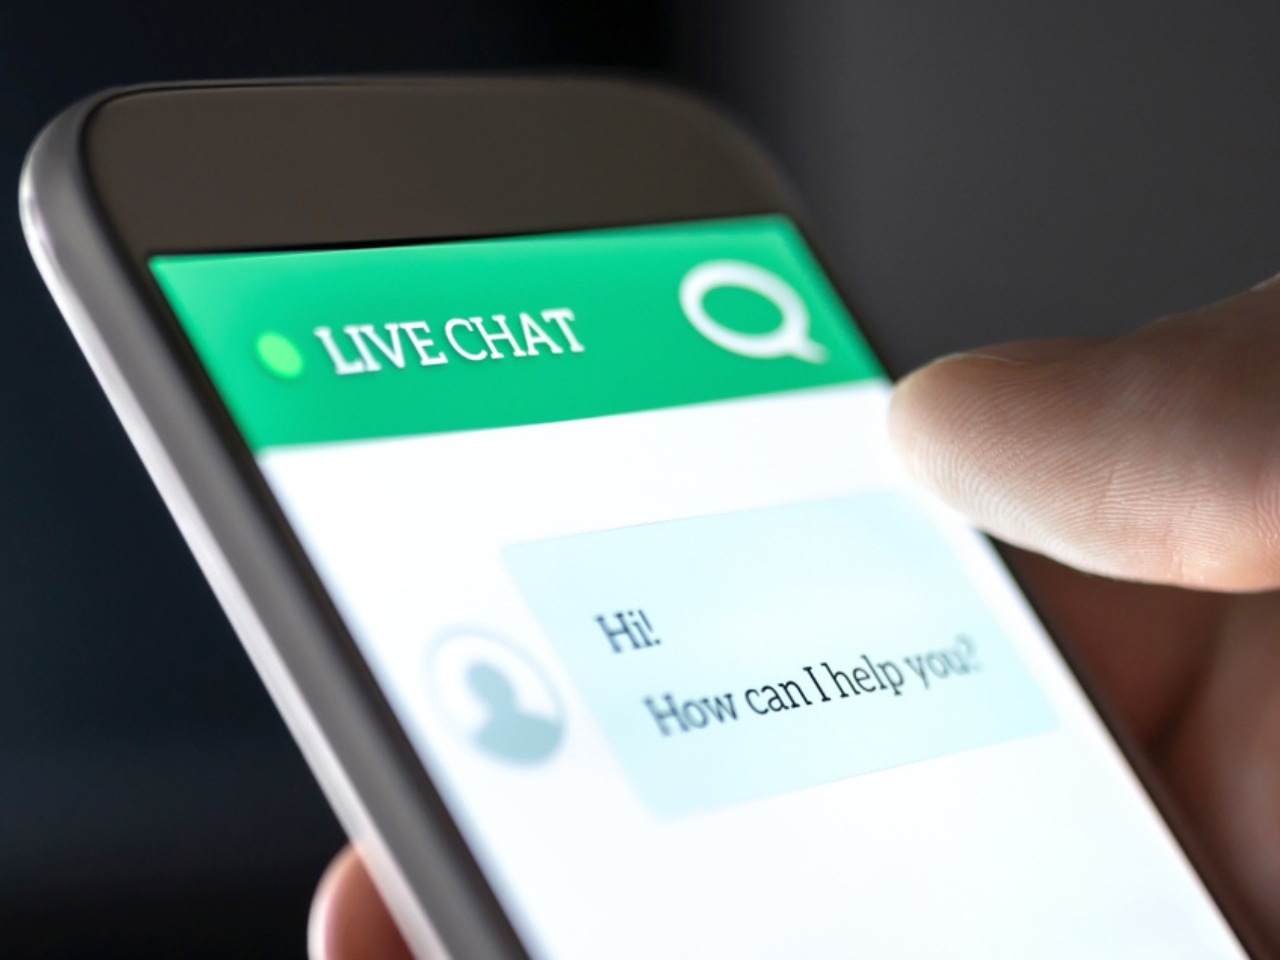 A customer uses live chat customer service on a smartphone